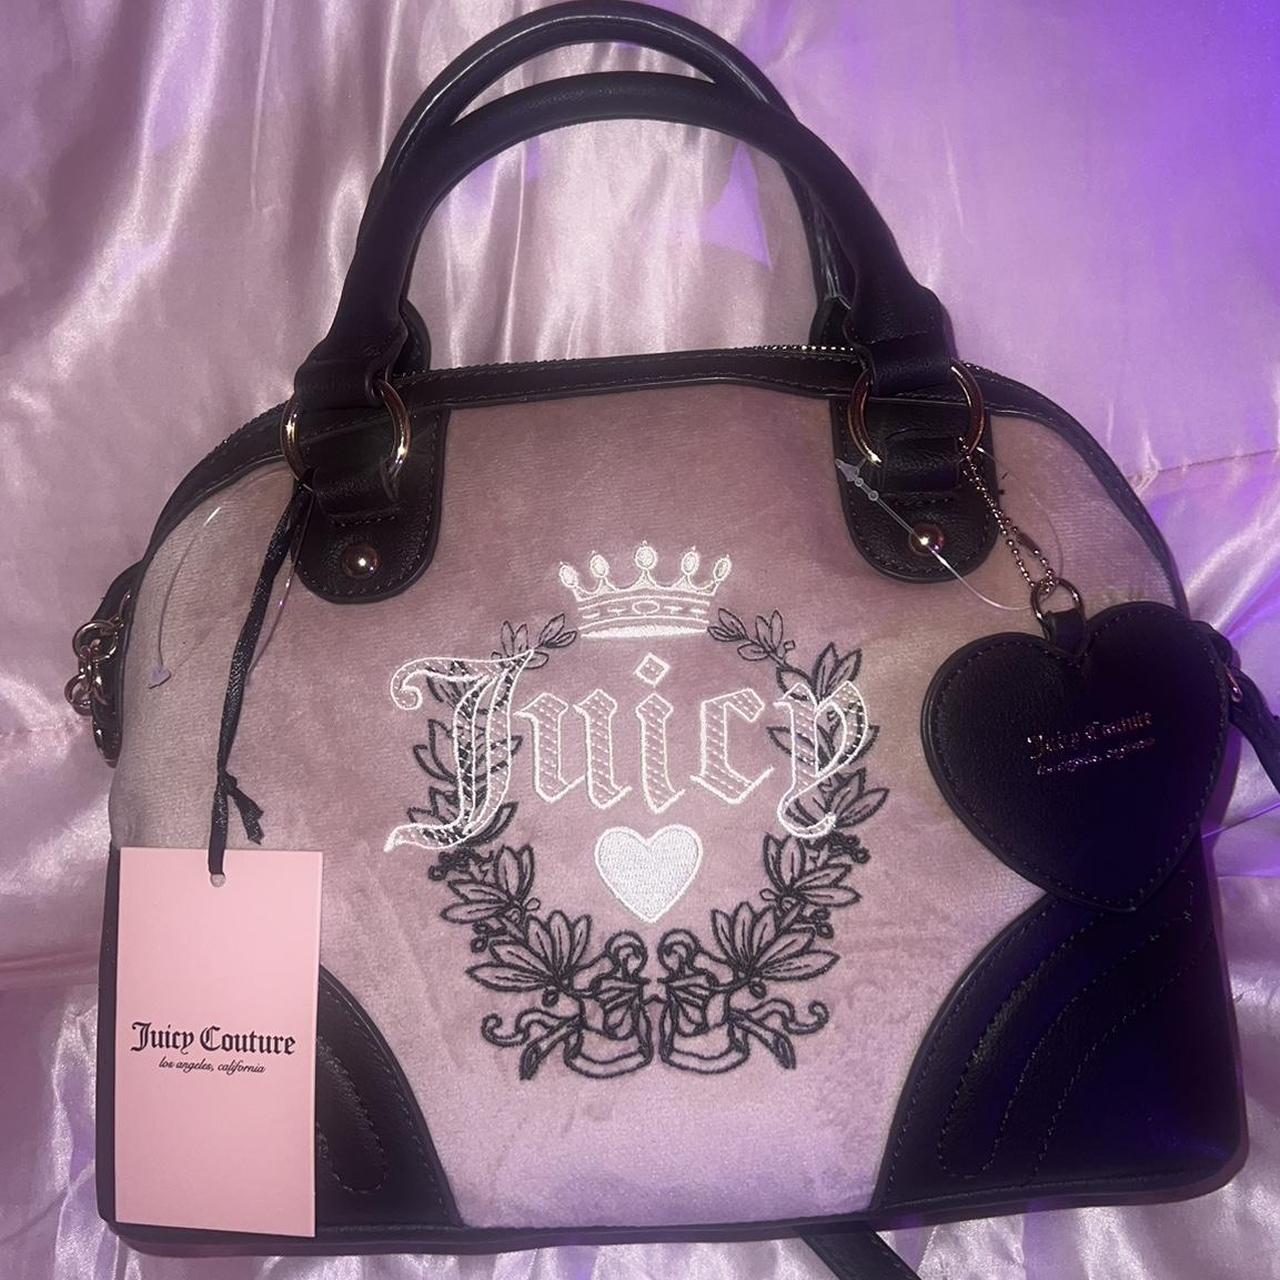 Dusty Pink Juicy Couture Purse Offers accepted!... - Depop